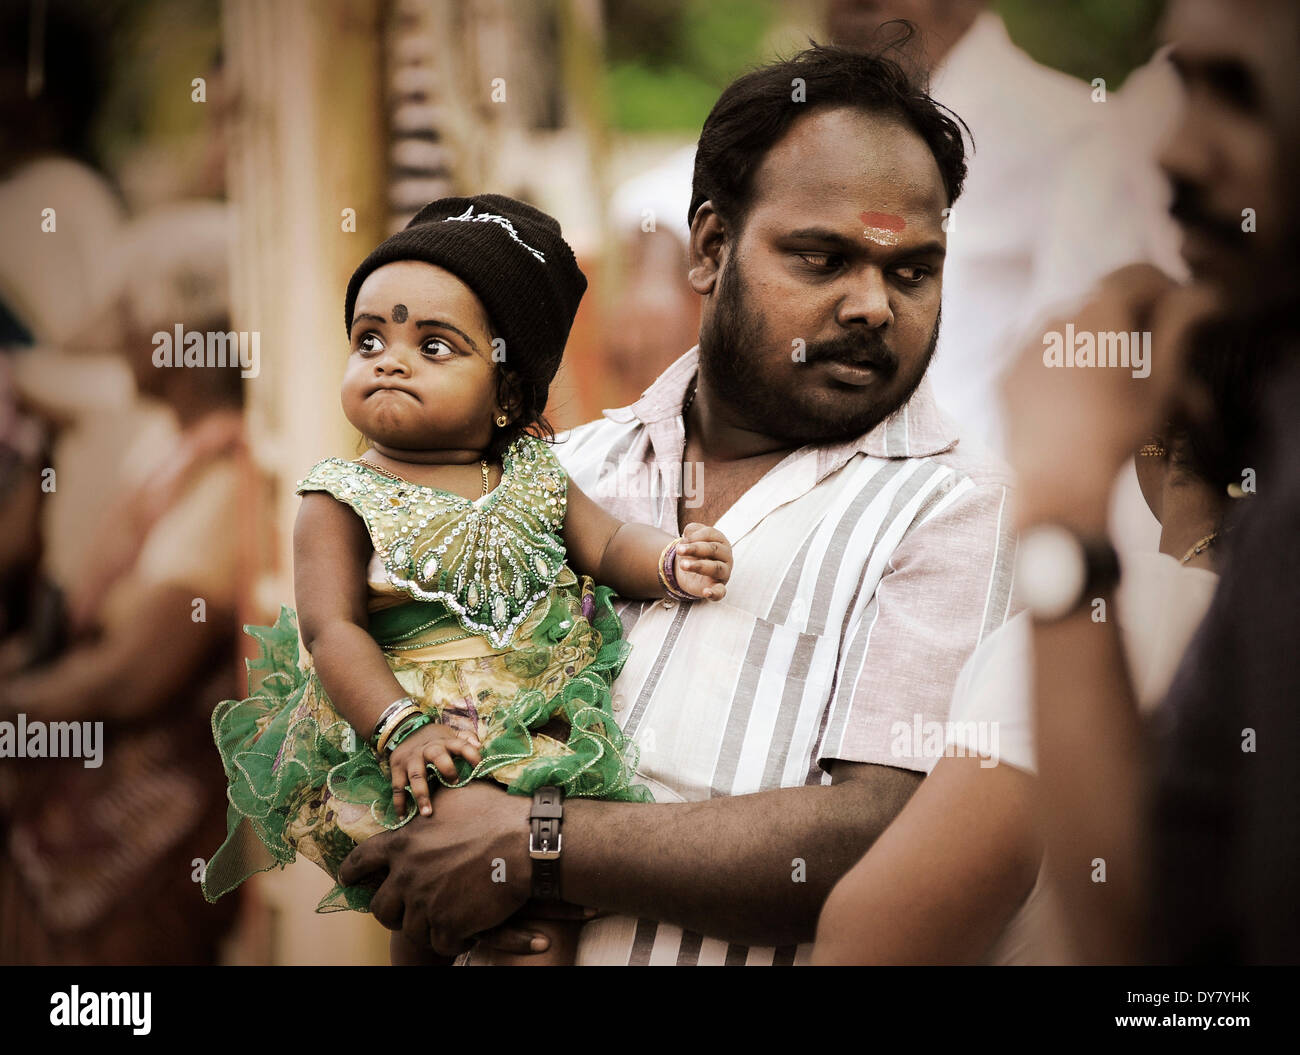 Father holding a child at a temple festival, Kerala, South India ...